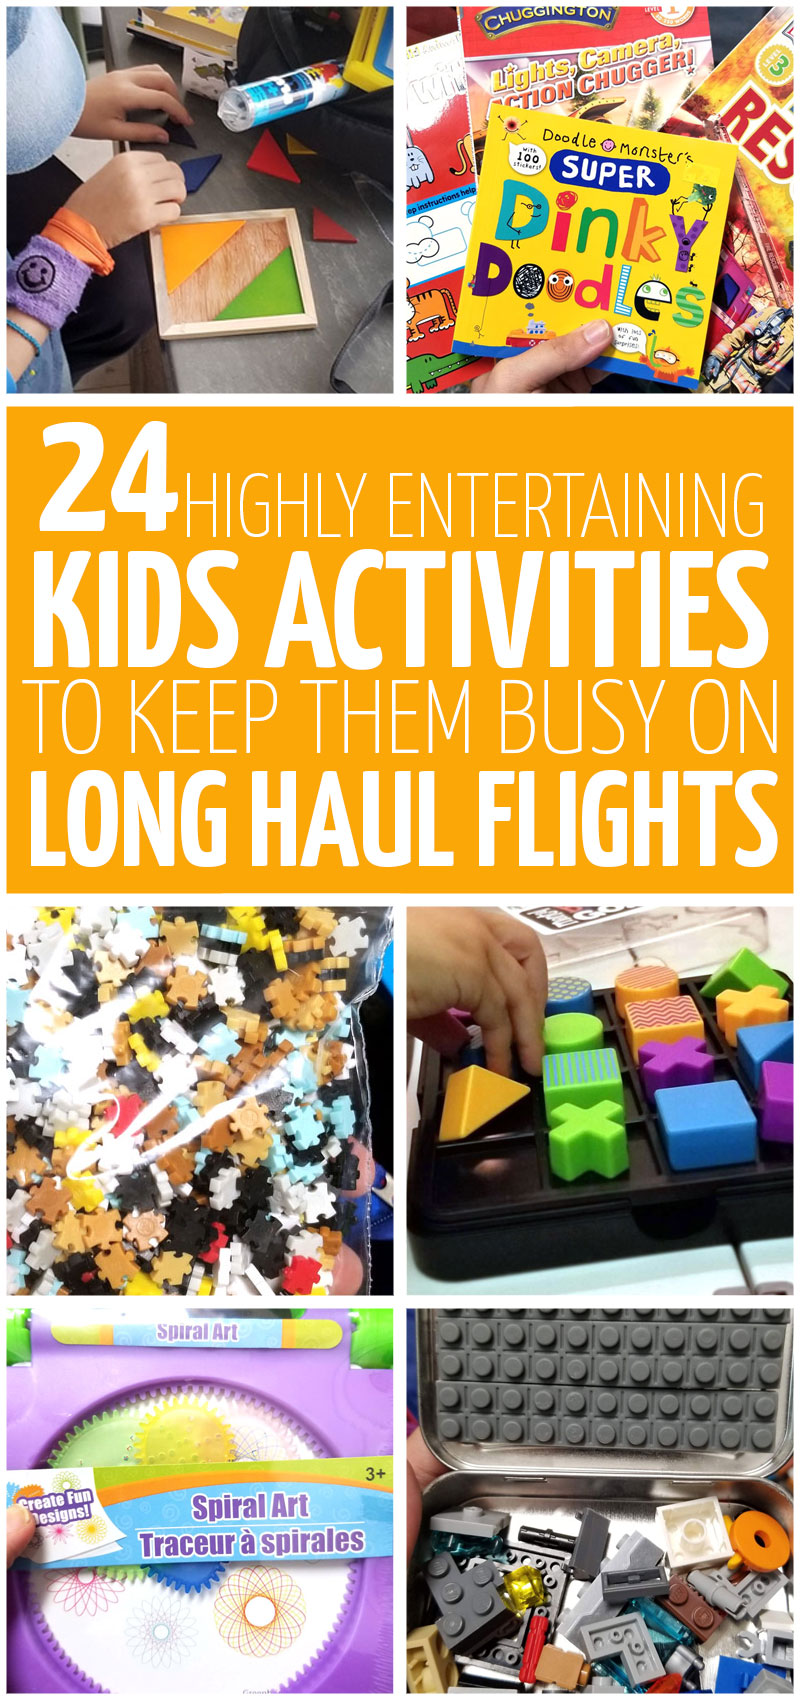 https://www.momsandcrafters.com/wp-content/uploads/2019/10/airplane-activities-for-kids-v1.jpg